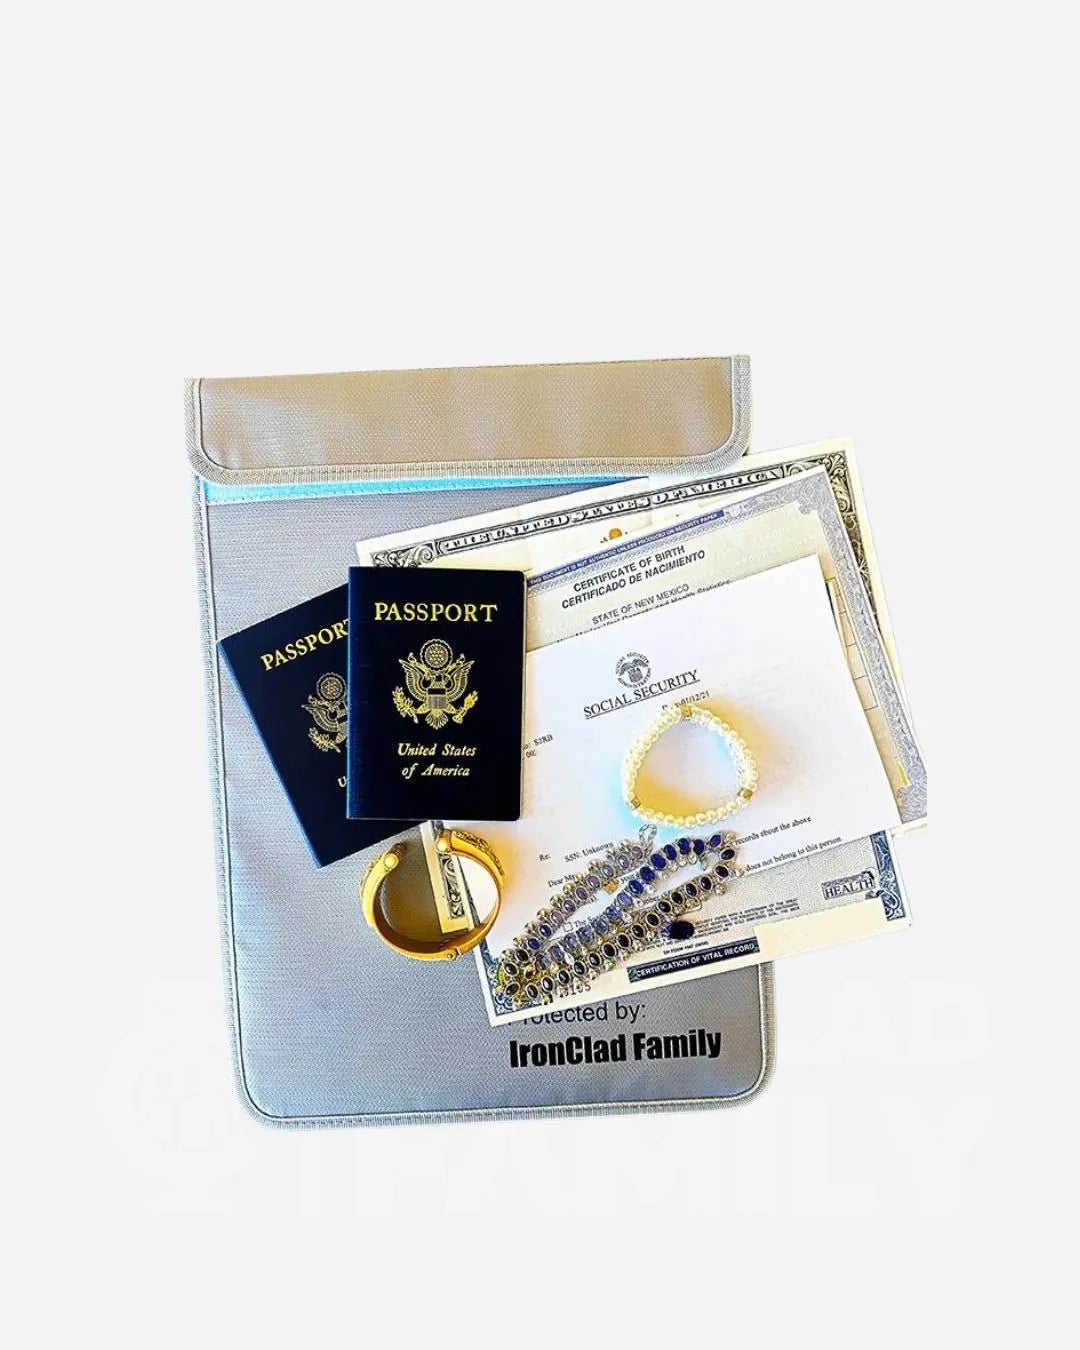 Passport and other documents stored in the Fireproof Water-Resistant Document Bag